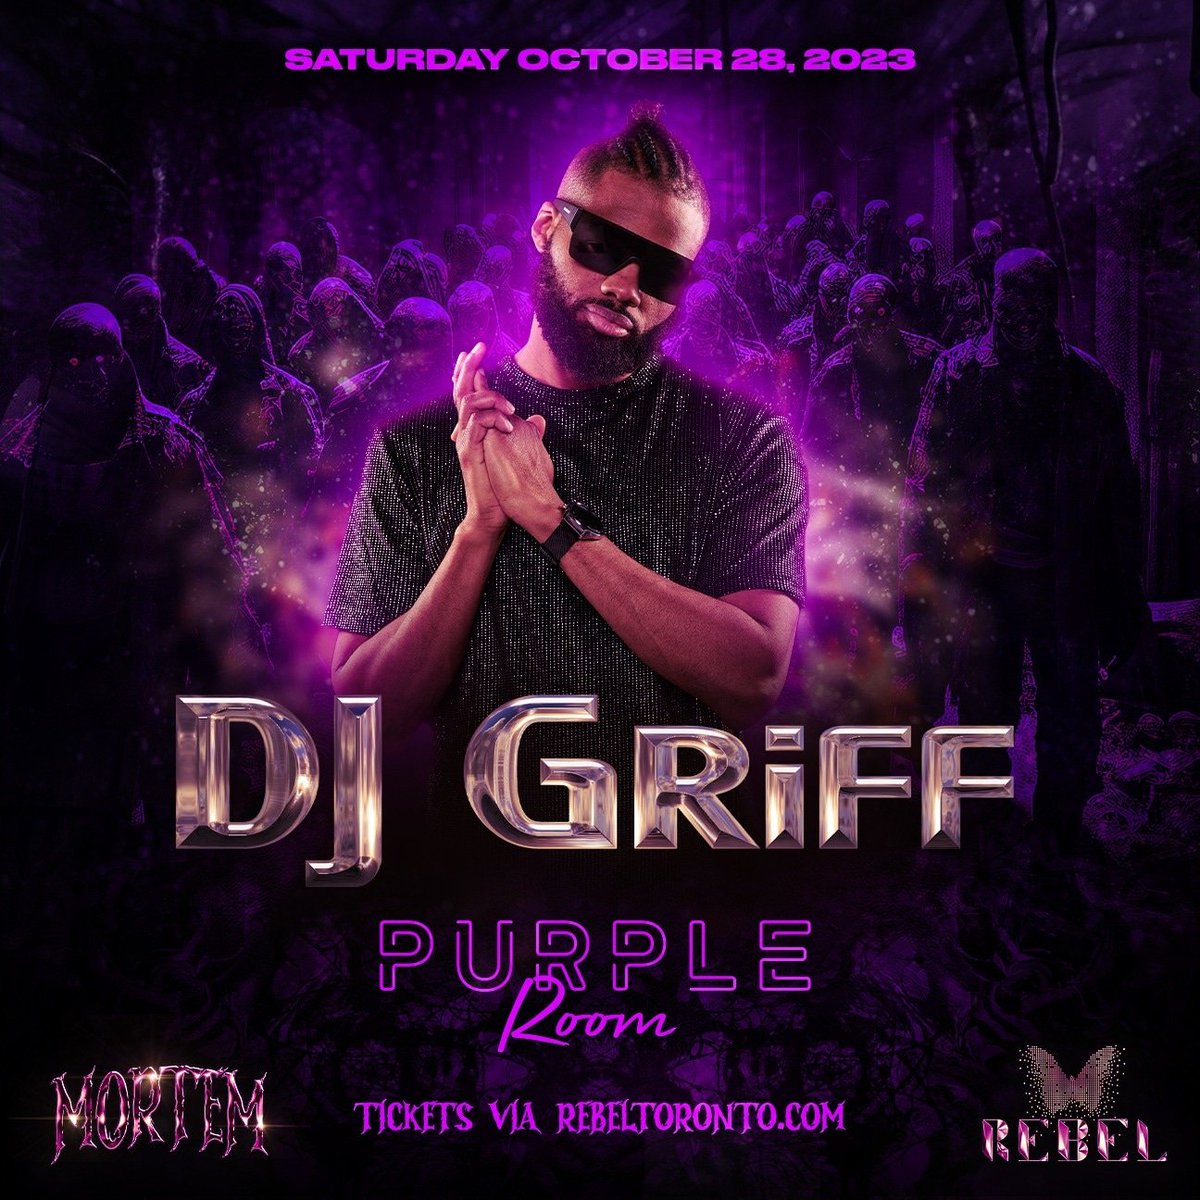 Oct 28th The King is Back inside @Rebel_Toronto Halloween #SaturdayNight!!

Get your Adv #Tickets Now and Book your #VIP Booth!! Text 416.735.7827

#Hiphop #Trap #Dancehall #PurpleRoom